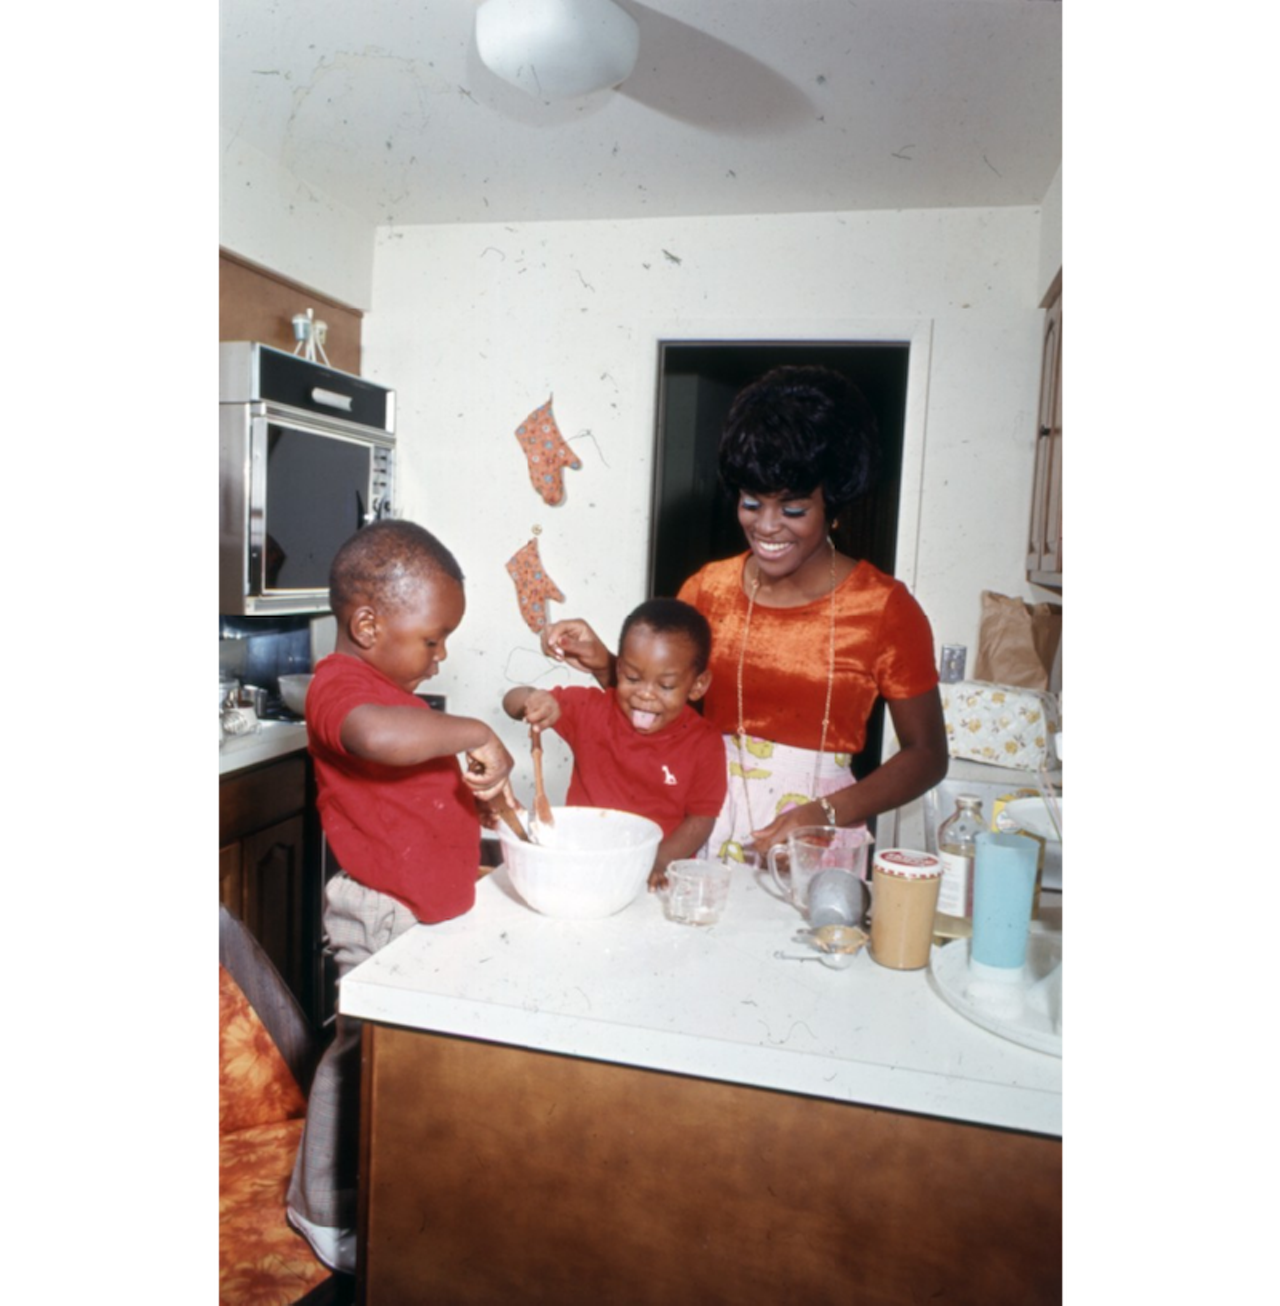 Mrs. Mel Farr, wife of Detroit Lions football player, and sons making Christmas cookies. (1969)
All photos courtesy of Walter P. Reuther Library, Archives of Labor and Urban Affairs, Wayne State University